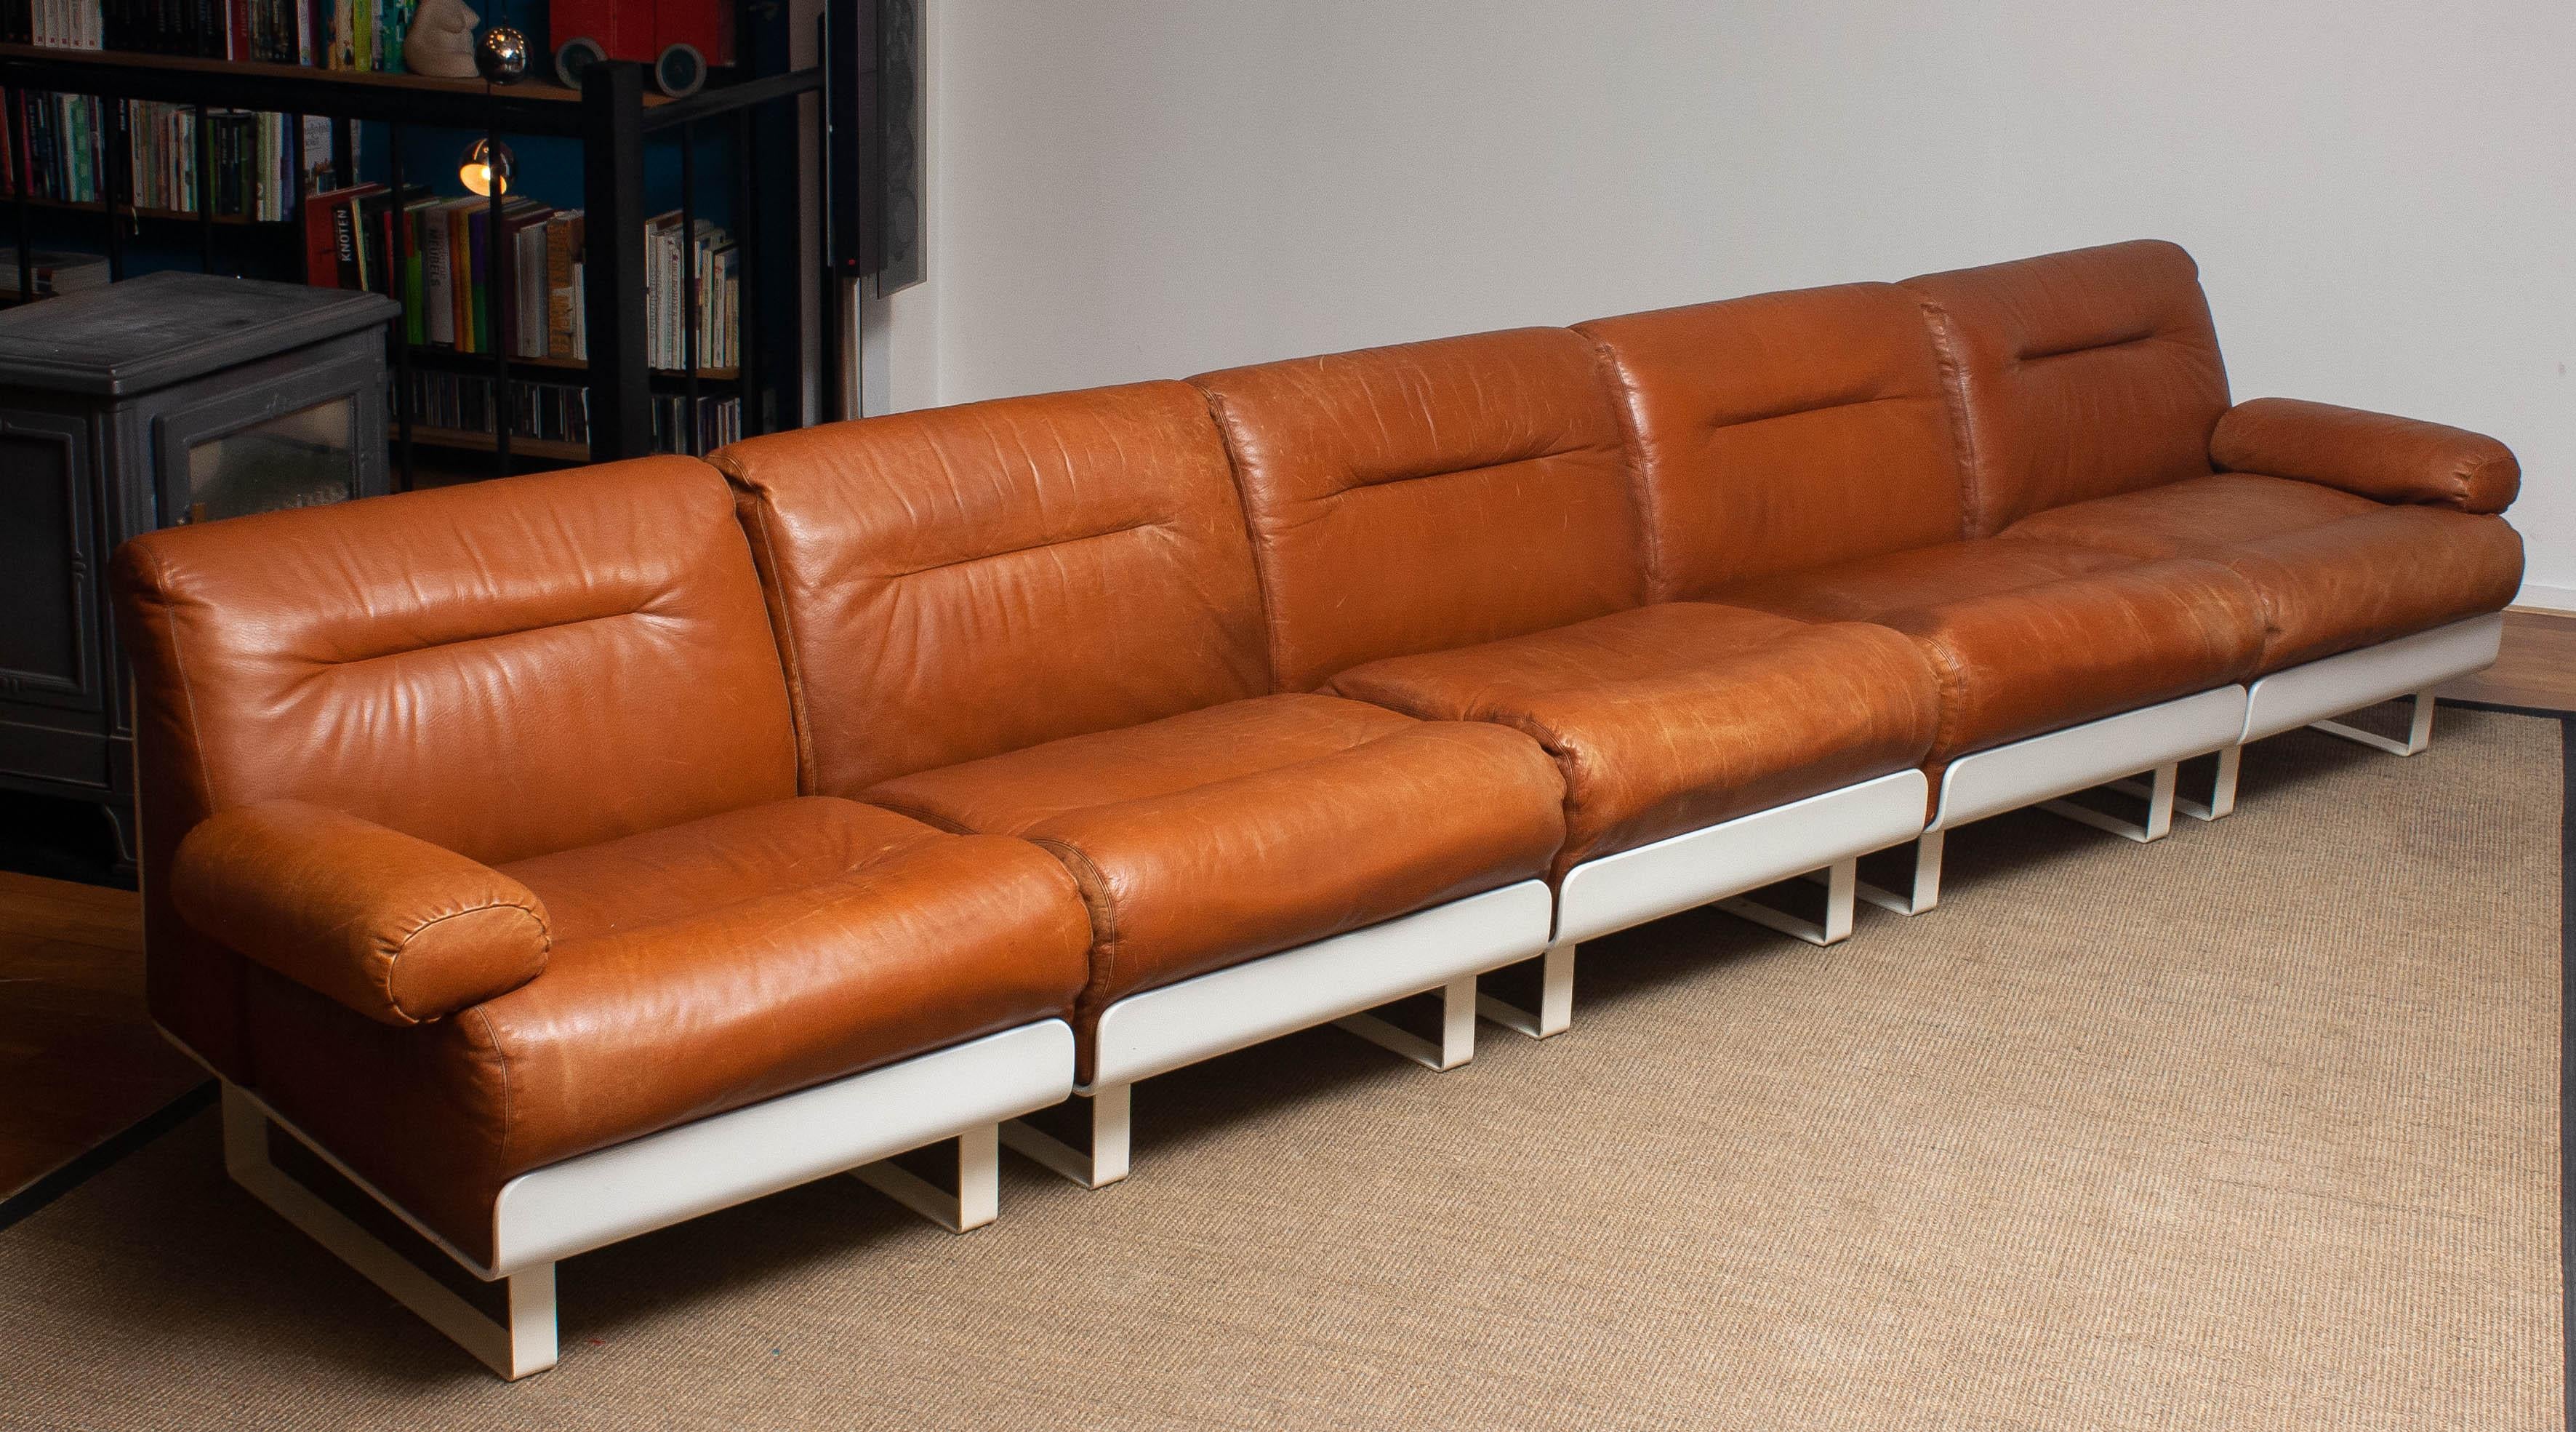 '70s Tan / Cognac Leather Sectional Sofa / Club Chairs by Luici Colani for COR 1